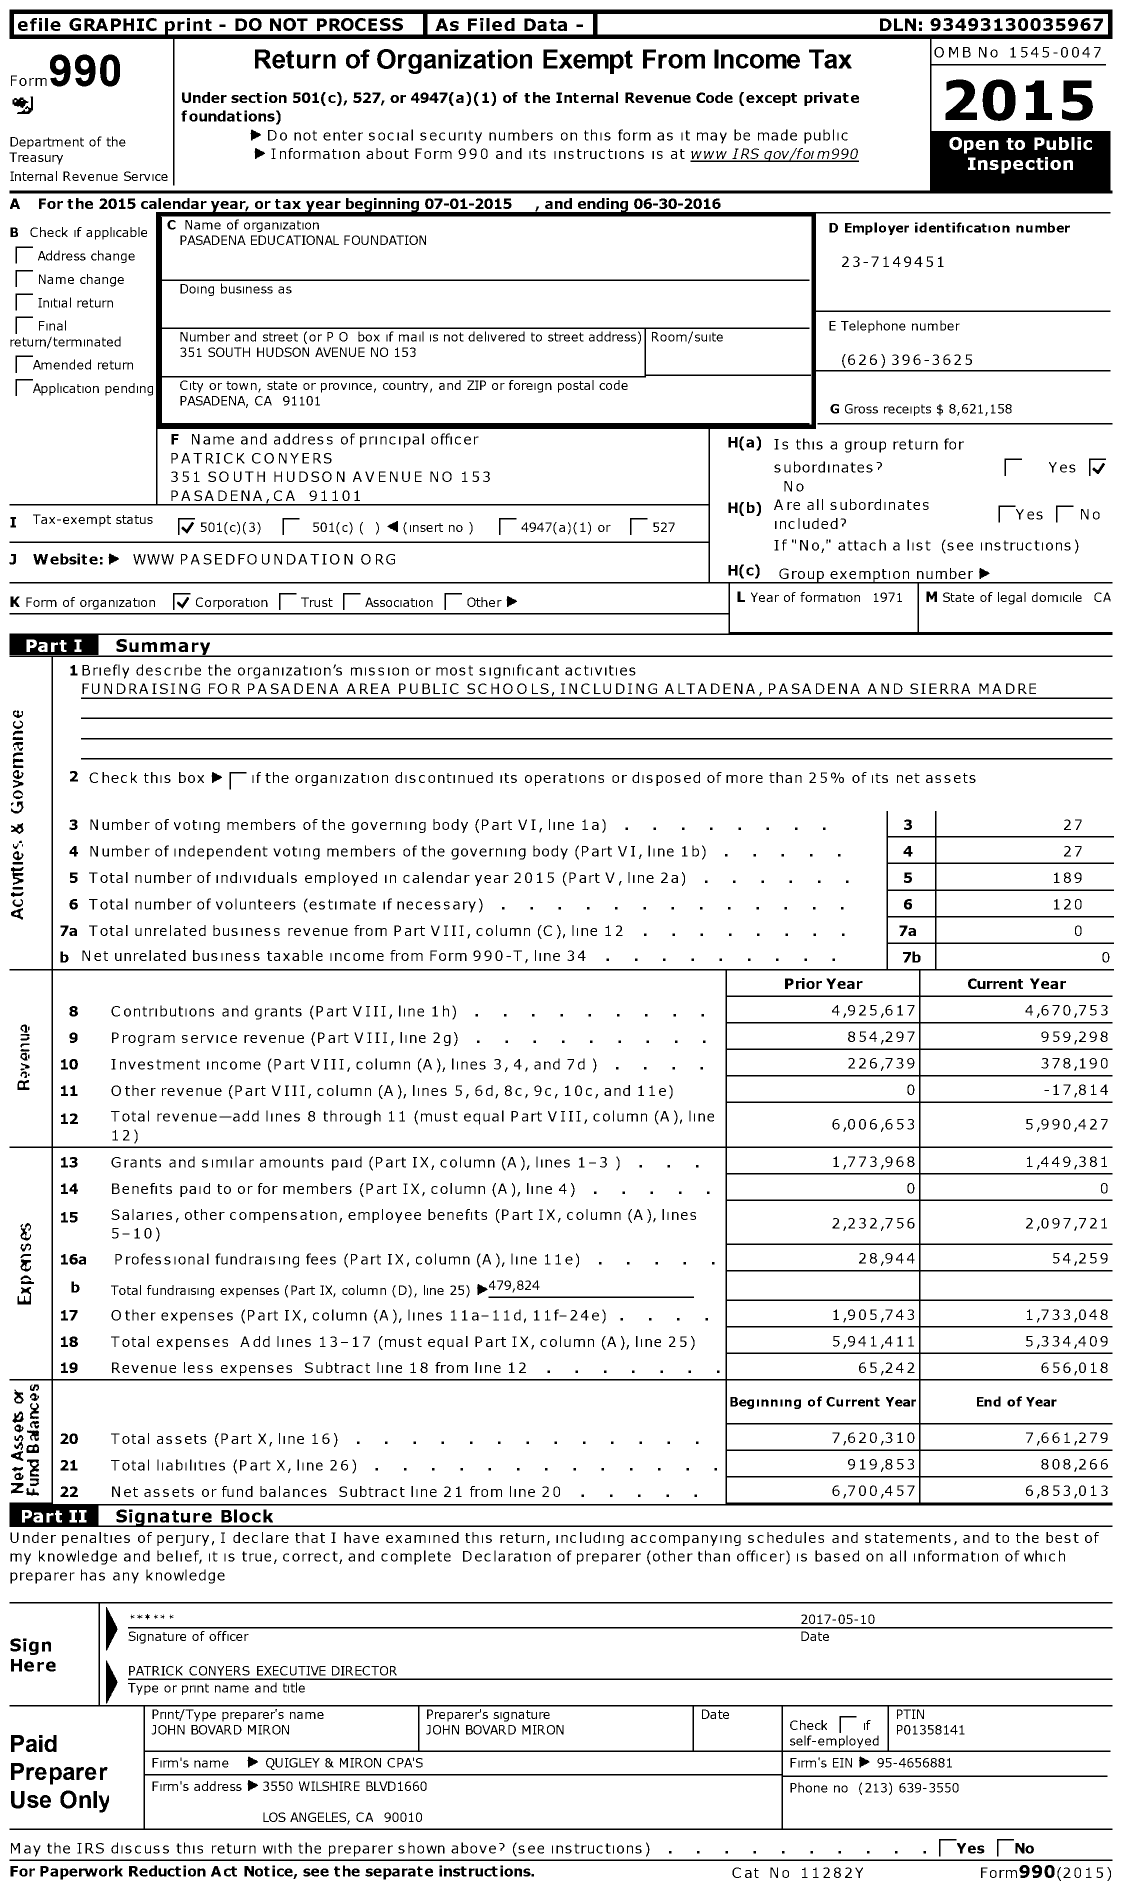 Image of first page of 2015 Form 990 for Pasadena Educational Foundation (PEF)